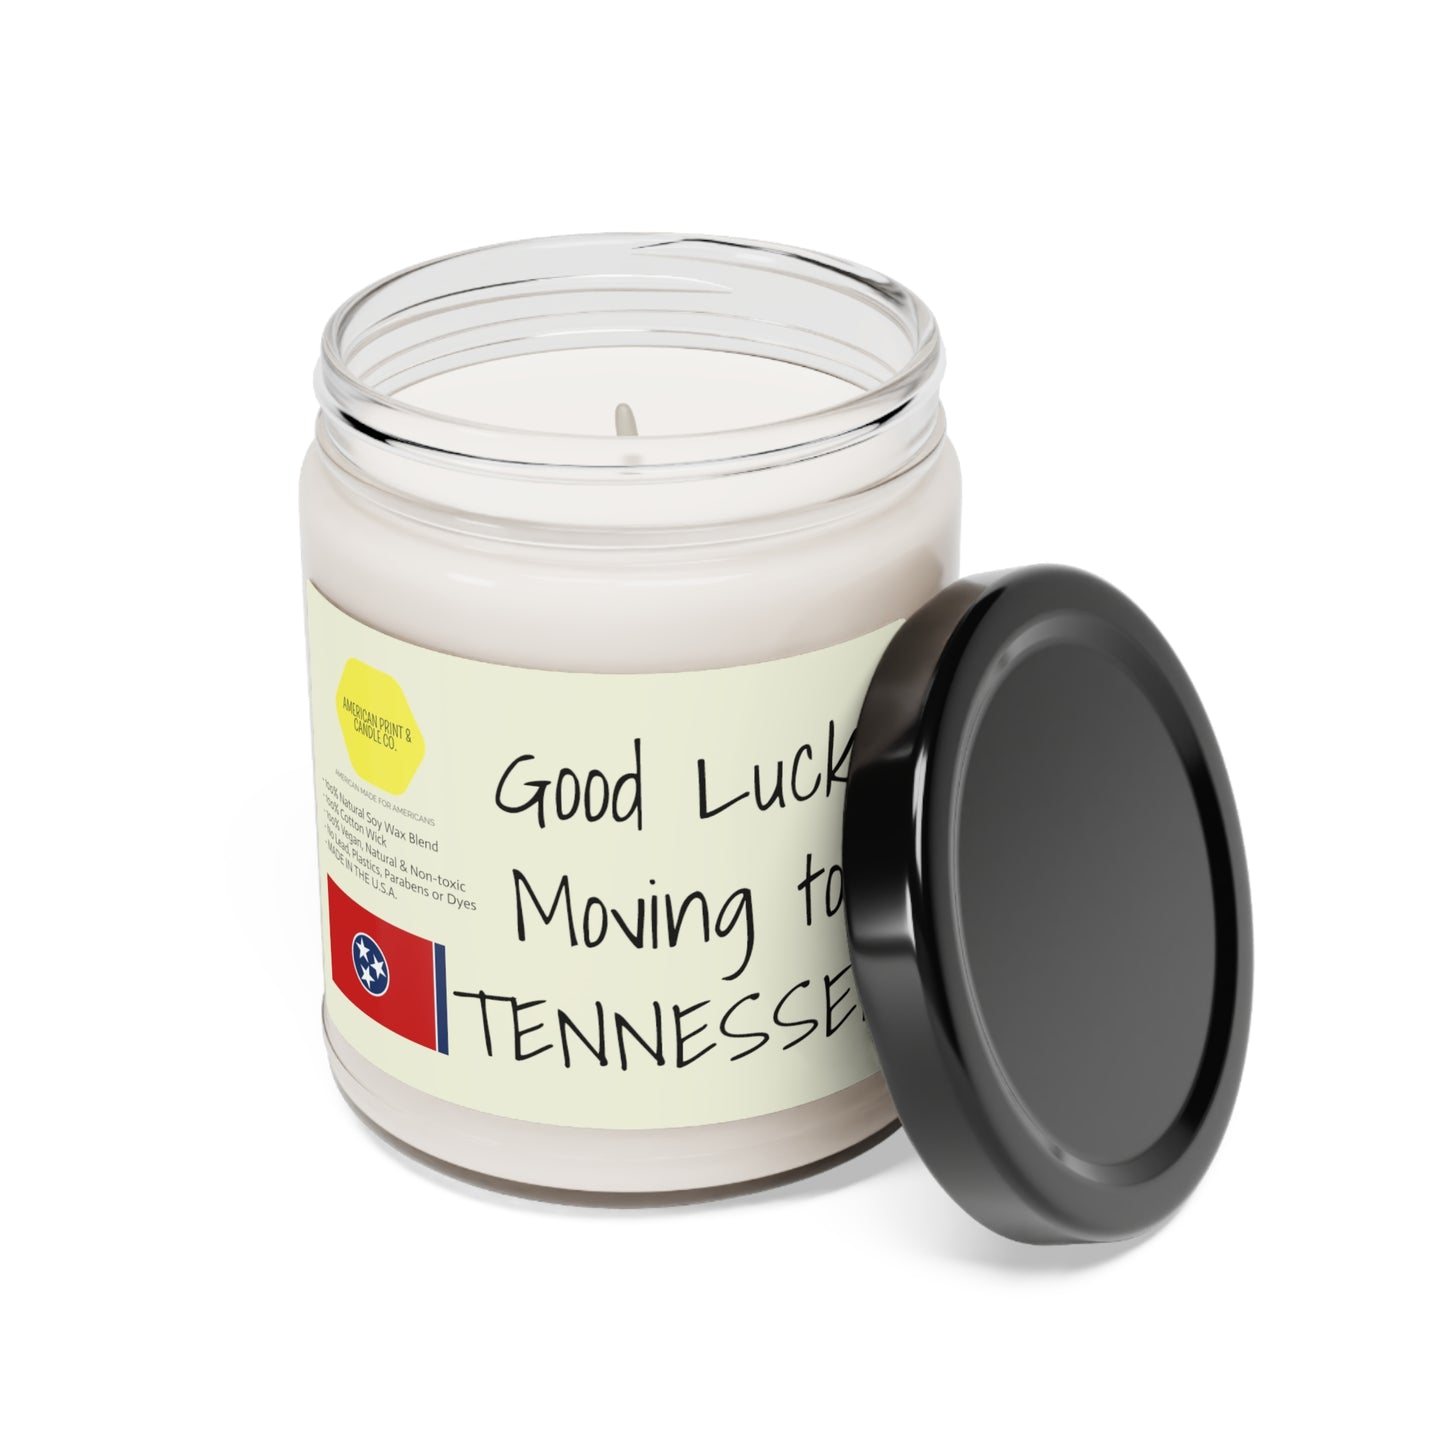 Good Luck moving to Tennessee scented Soy Candle, 9oz